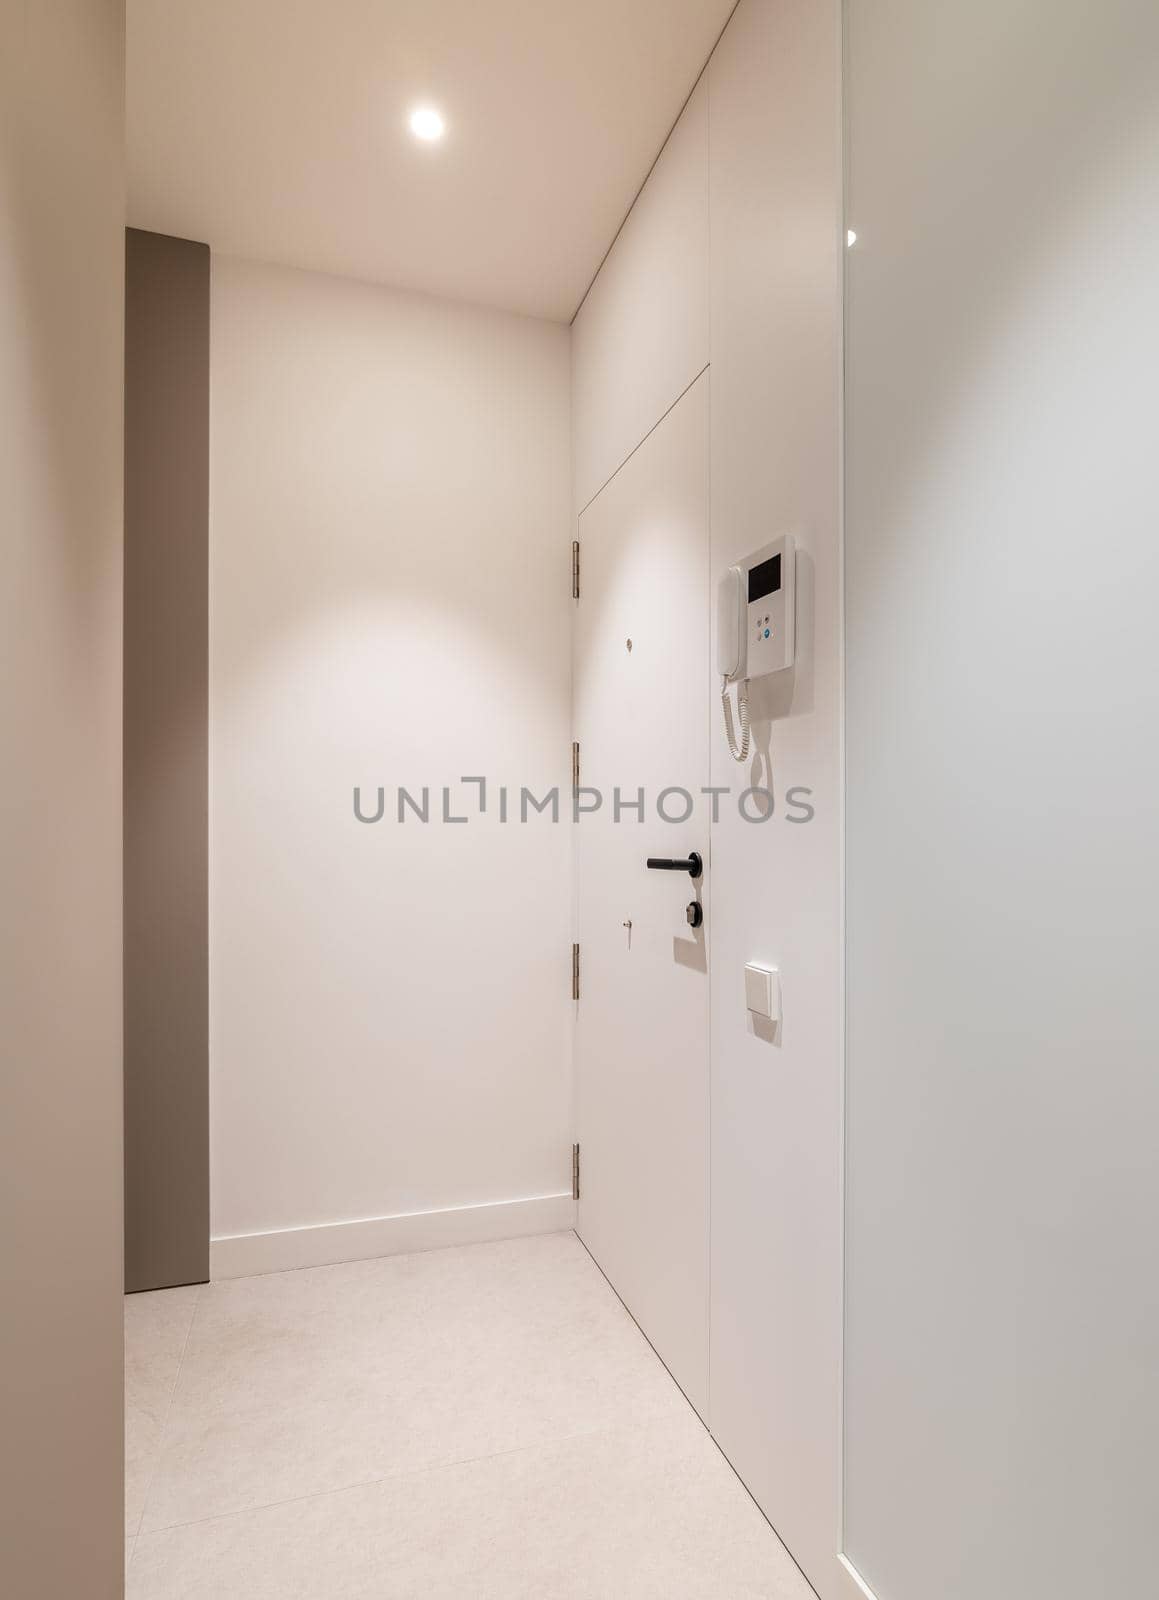 Vertical view of entrance hall area in modern refurbished apartment. White walls and door with intercom system